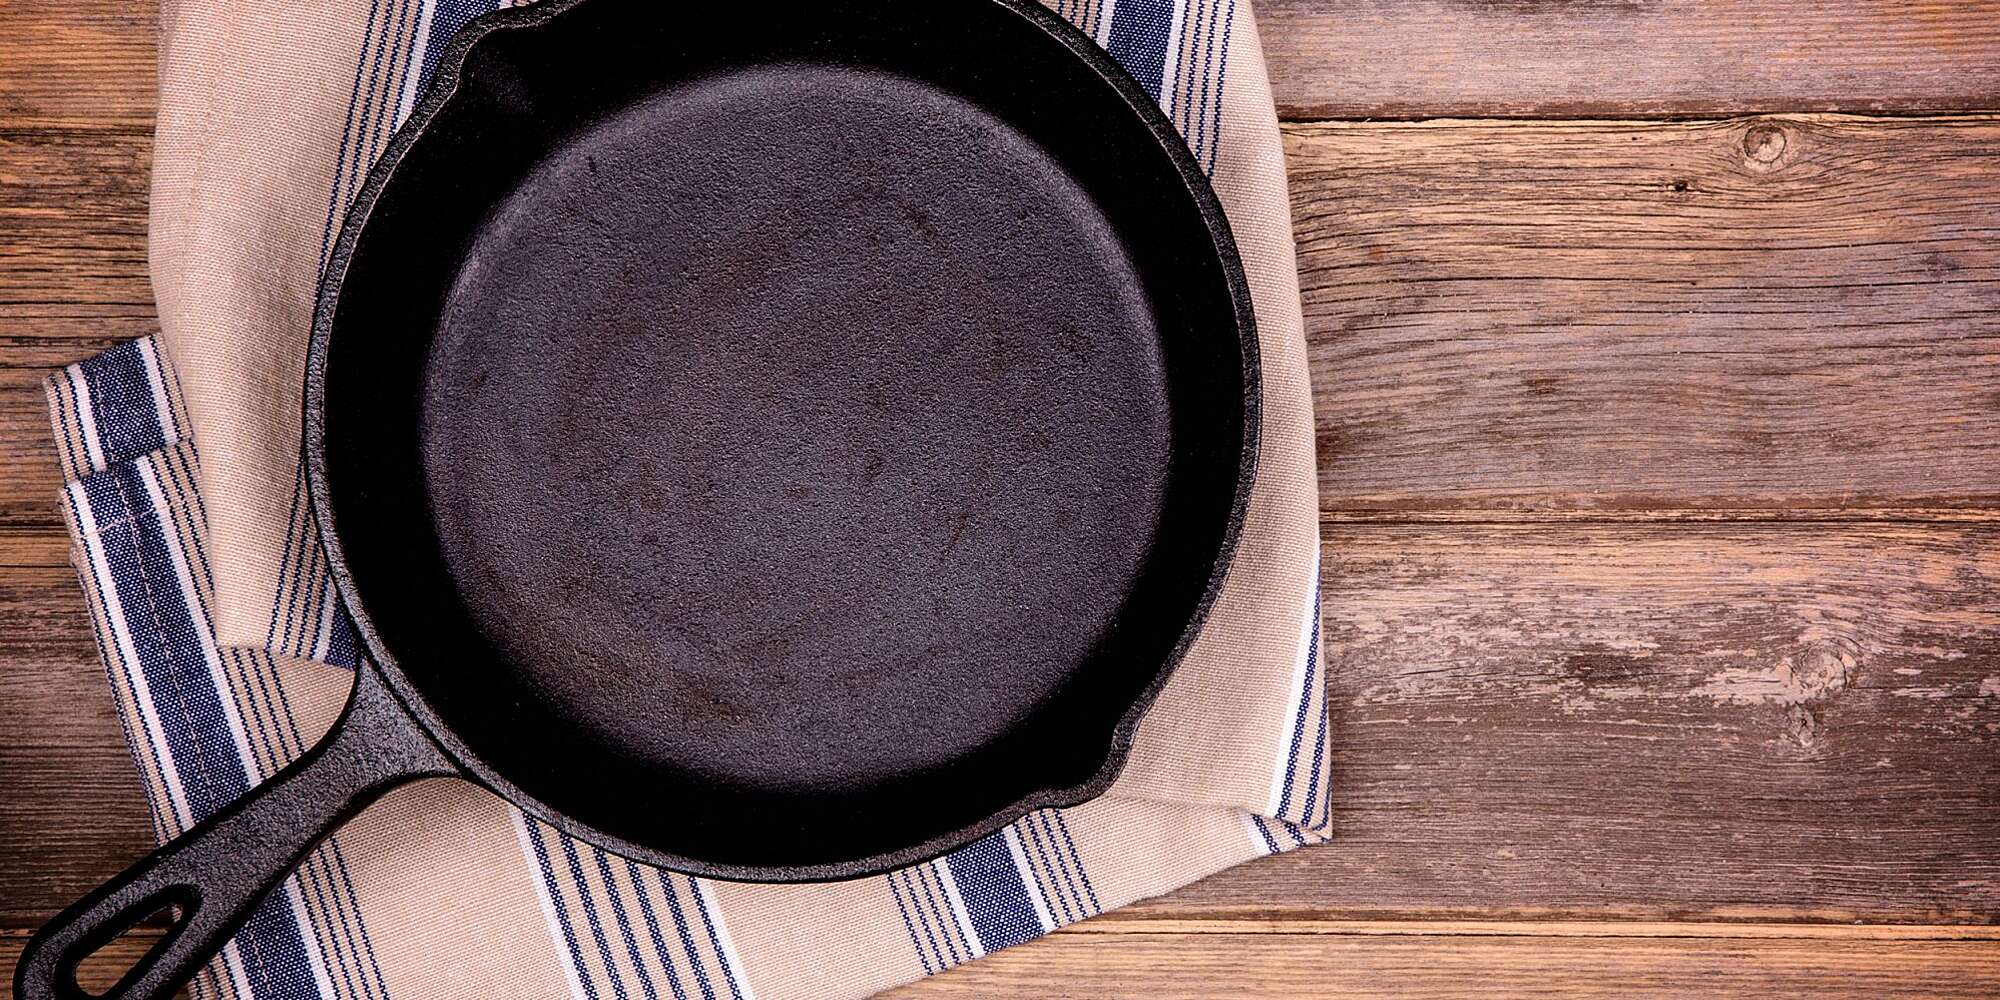 What To Do First with Your Finex Cast Iron Skillet - Seasoning &  Maintenance 